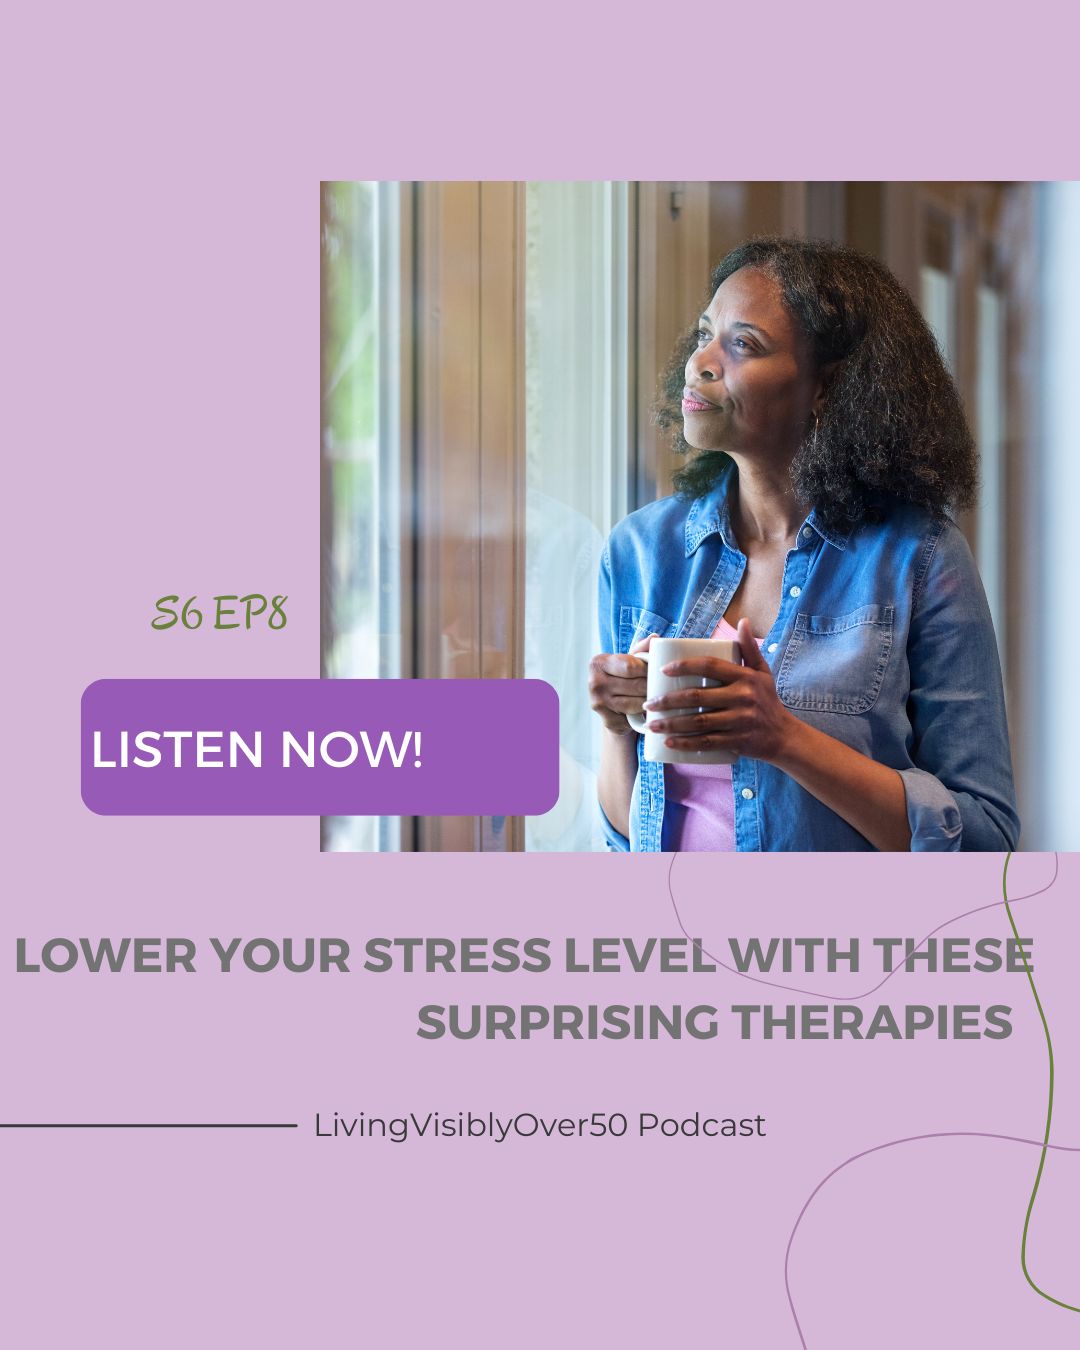 Living Visibly Over 50 Podcast